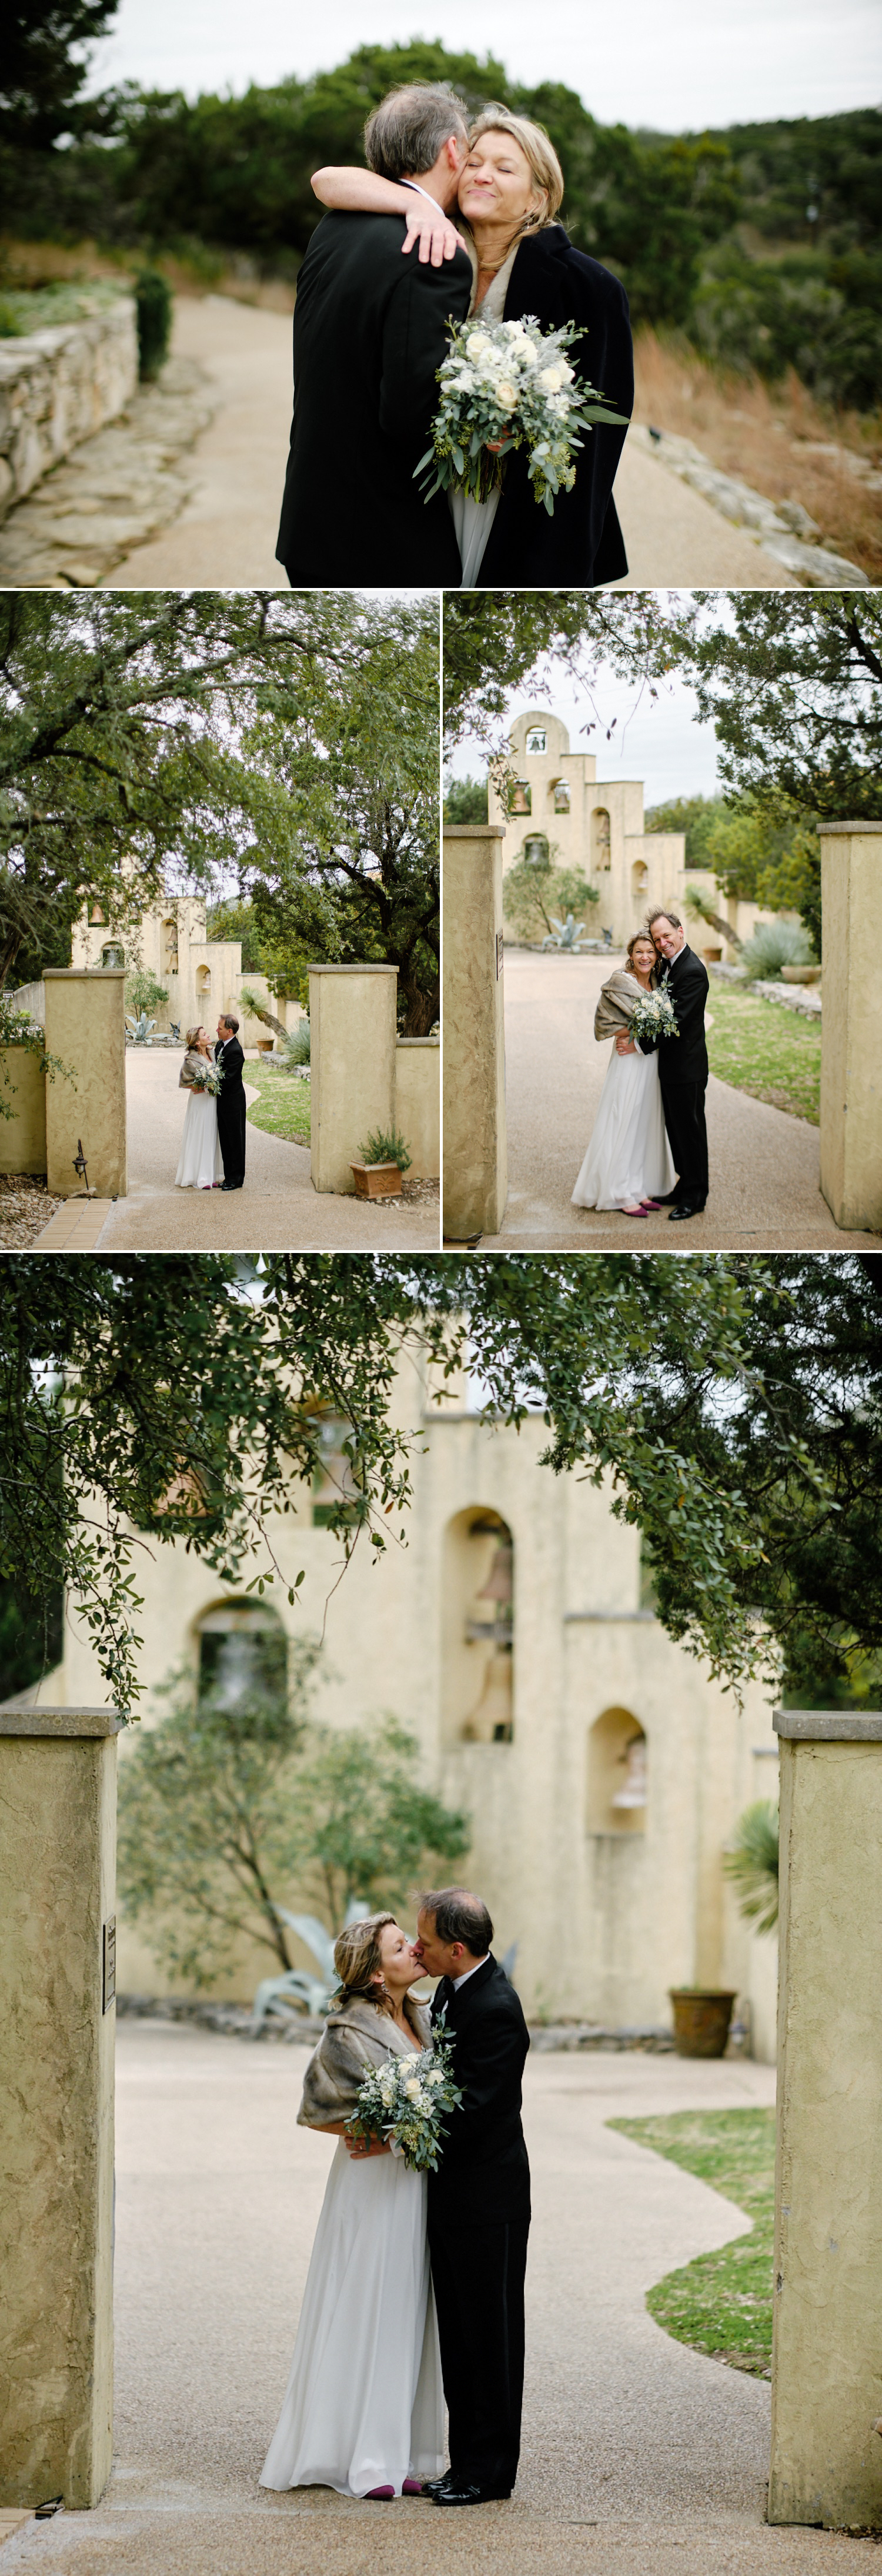 Spontaneous hugs, smiles and kisses from Amy and Martin, post-wedding | Austin wedding photography by Mercedes Morgan Photography